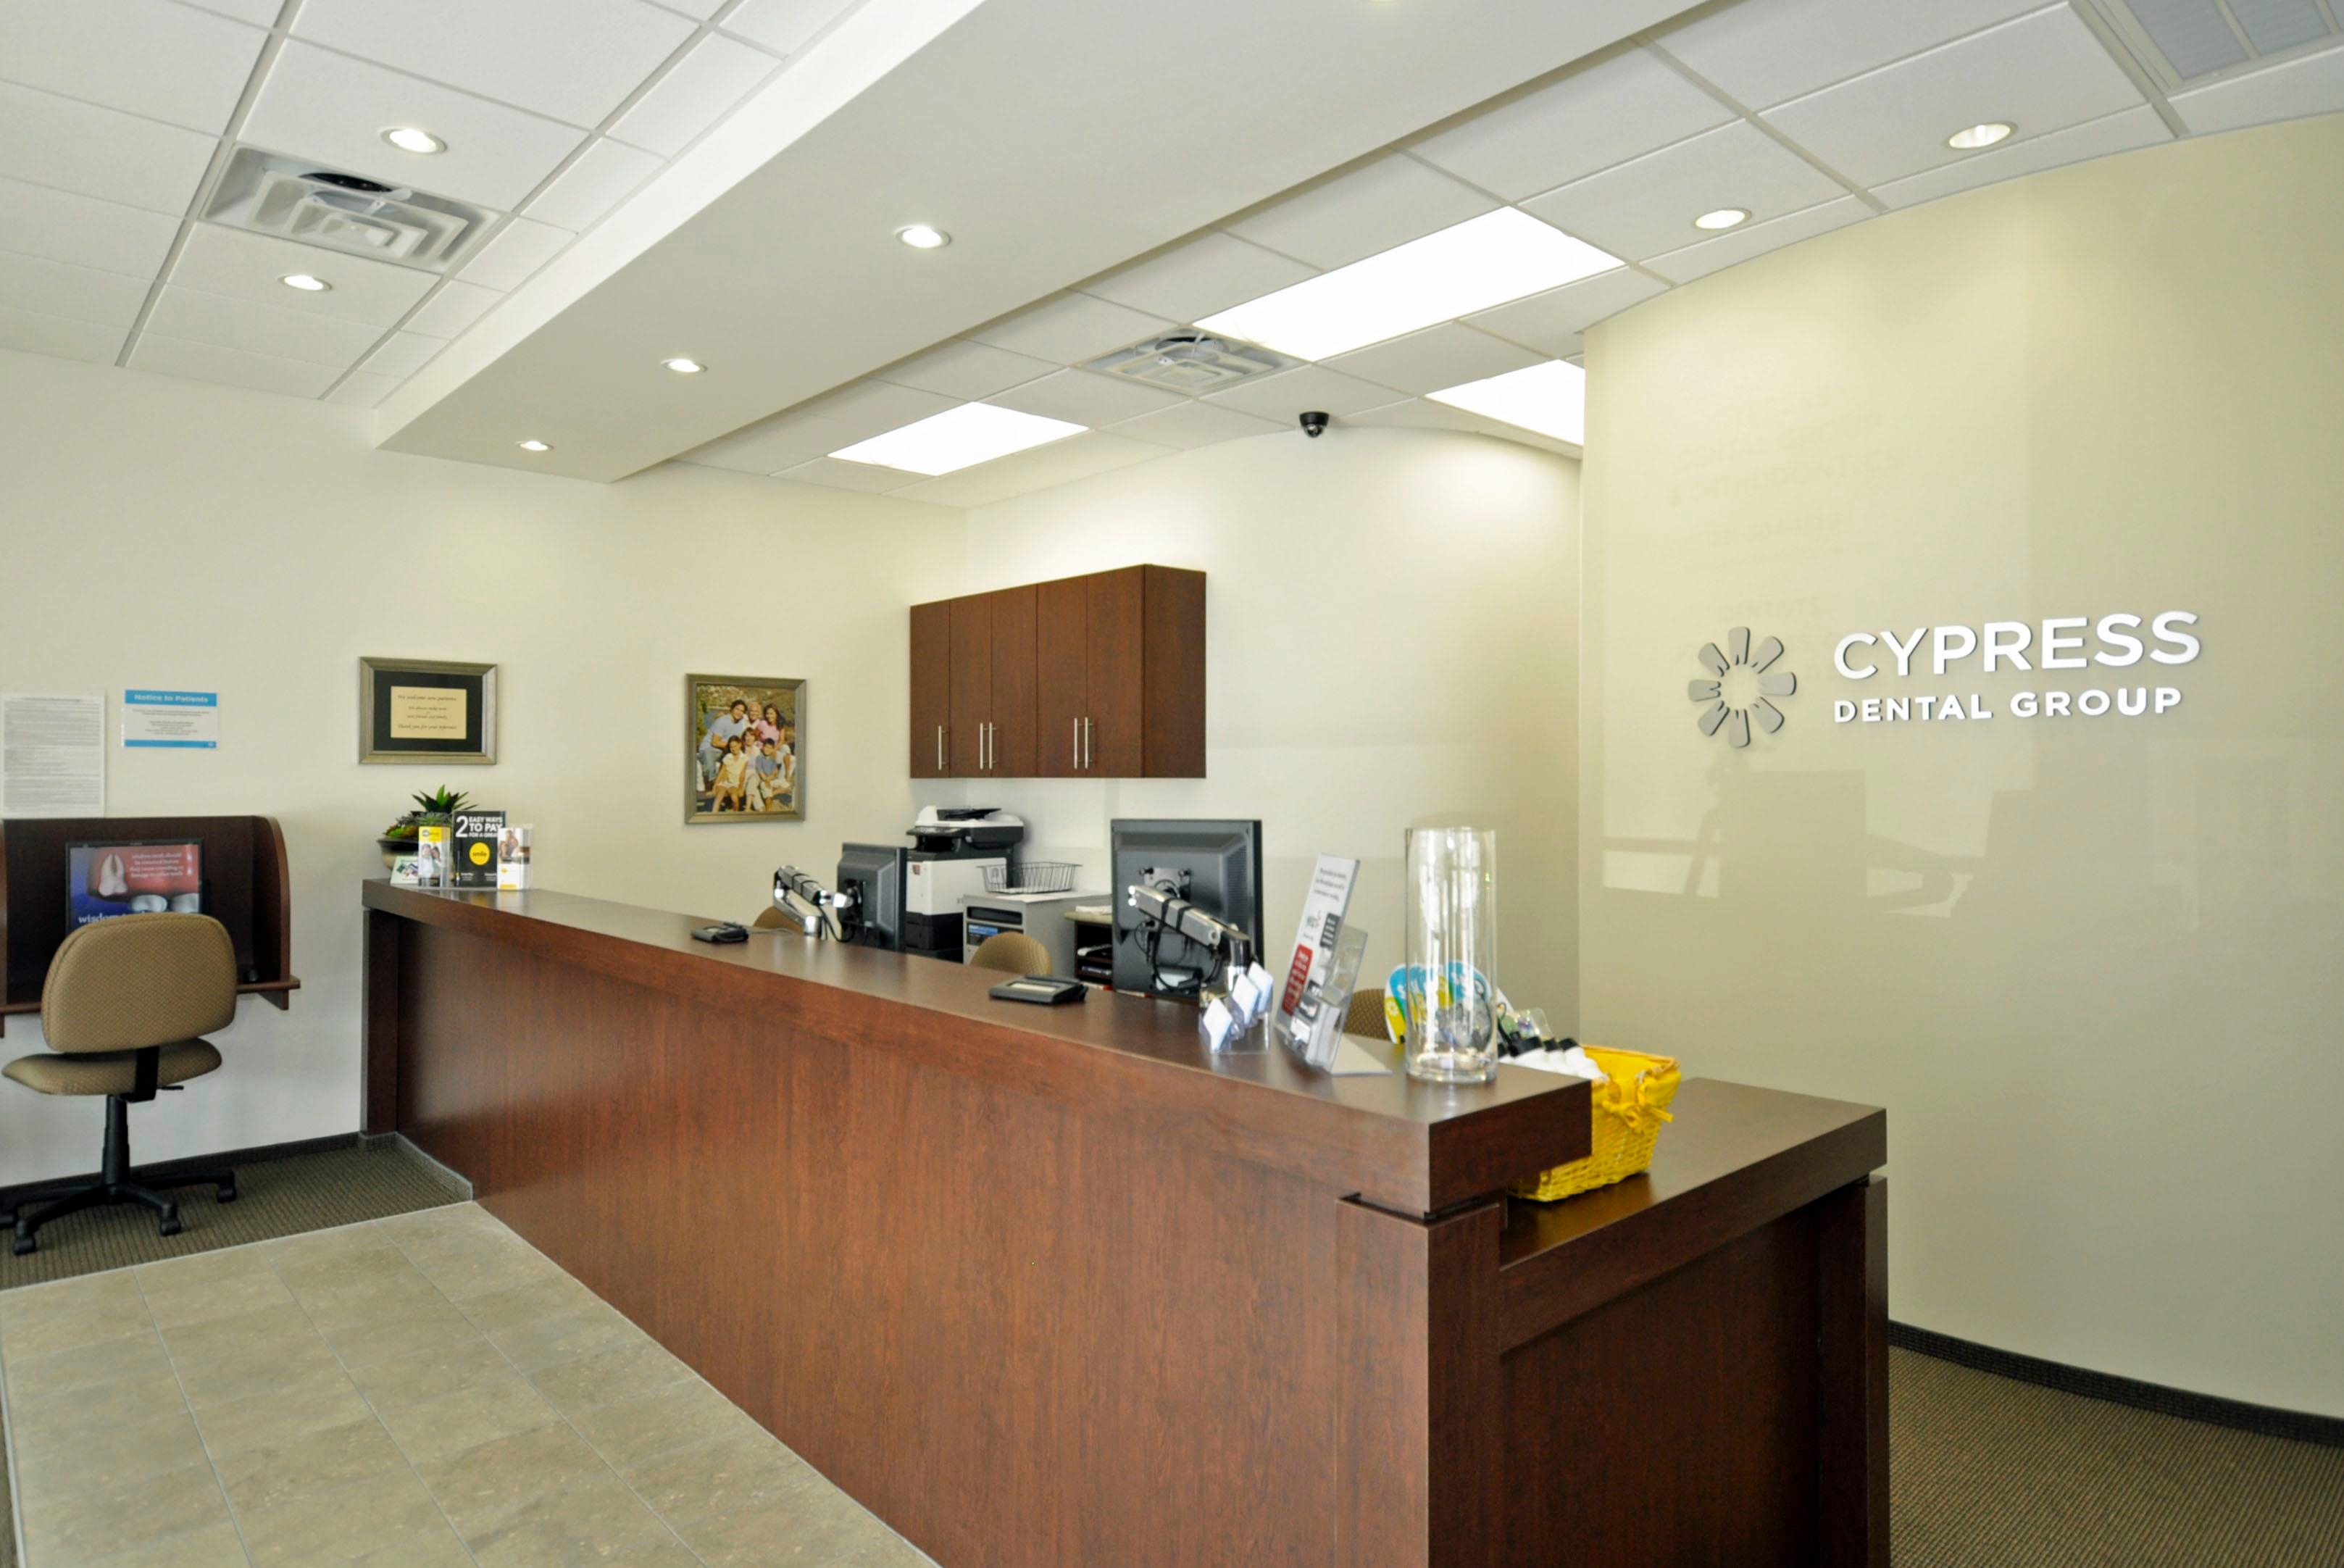 Cypress Dental Group and Orthodontics Photo